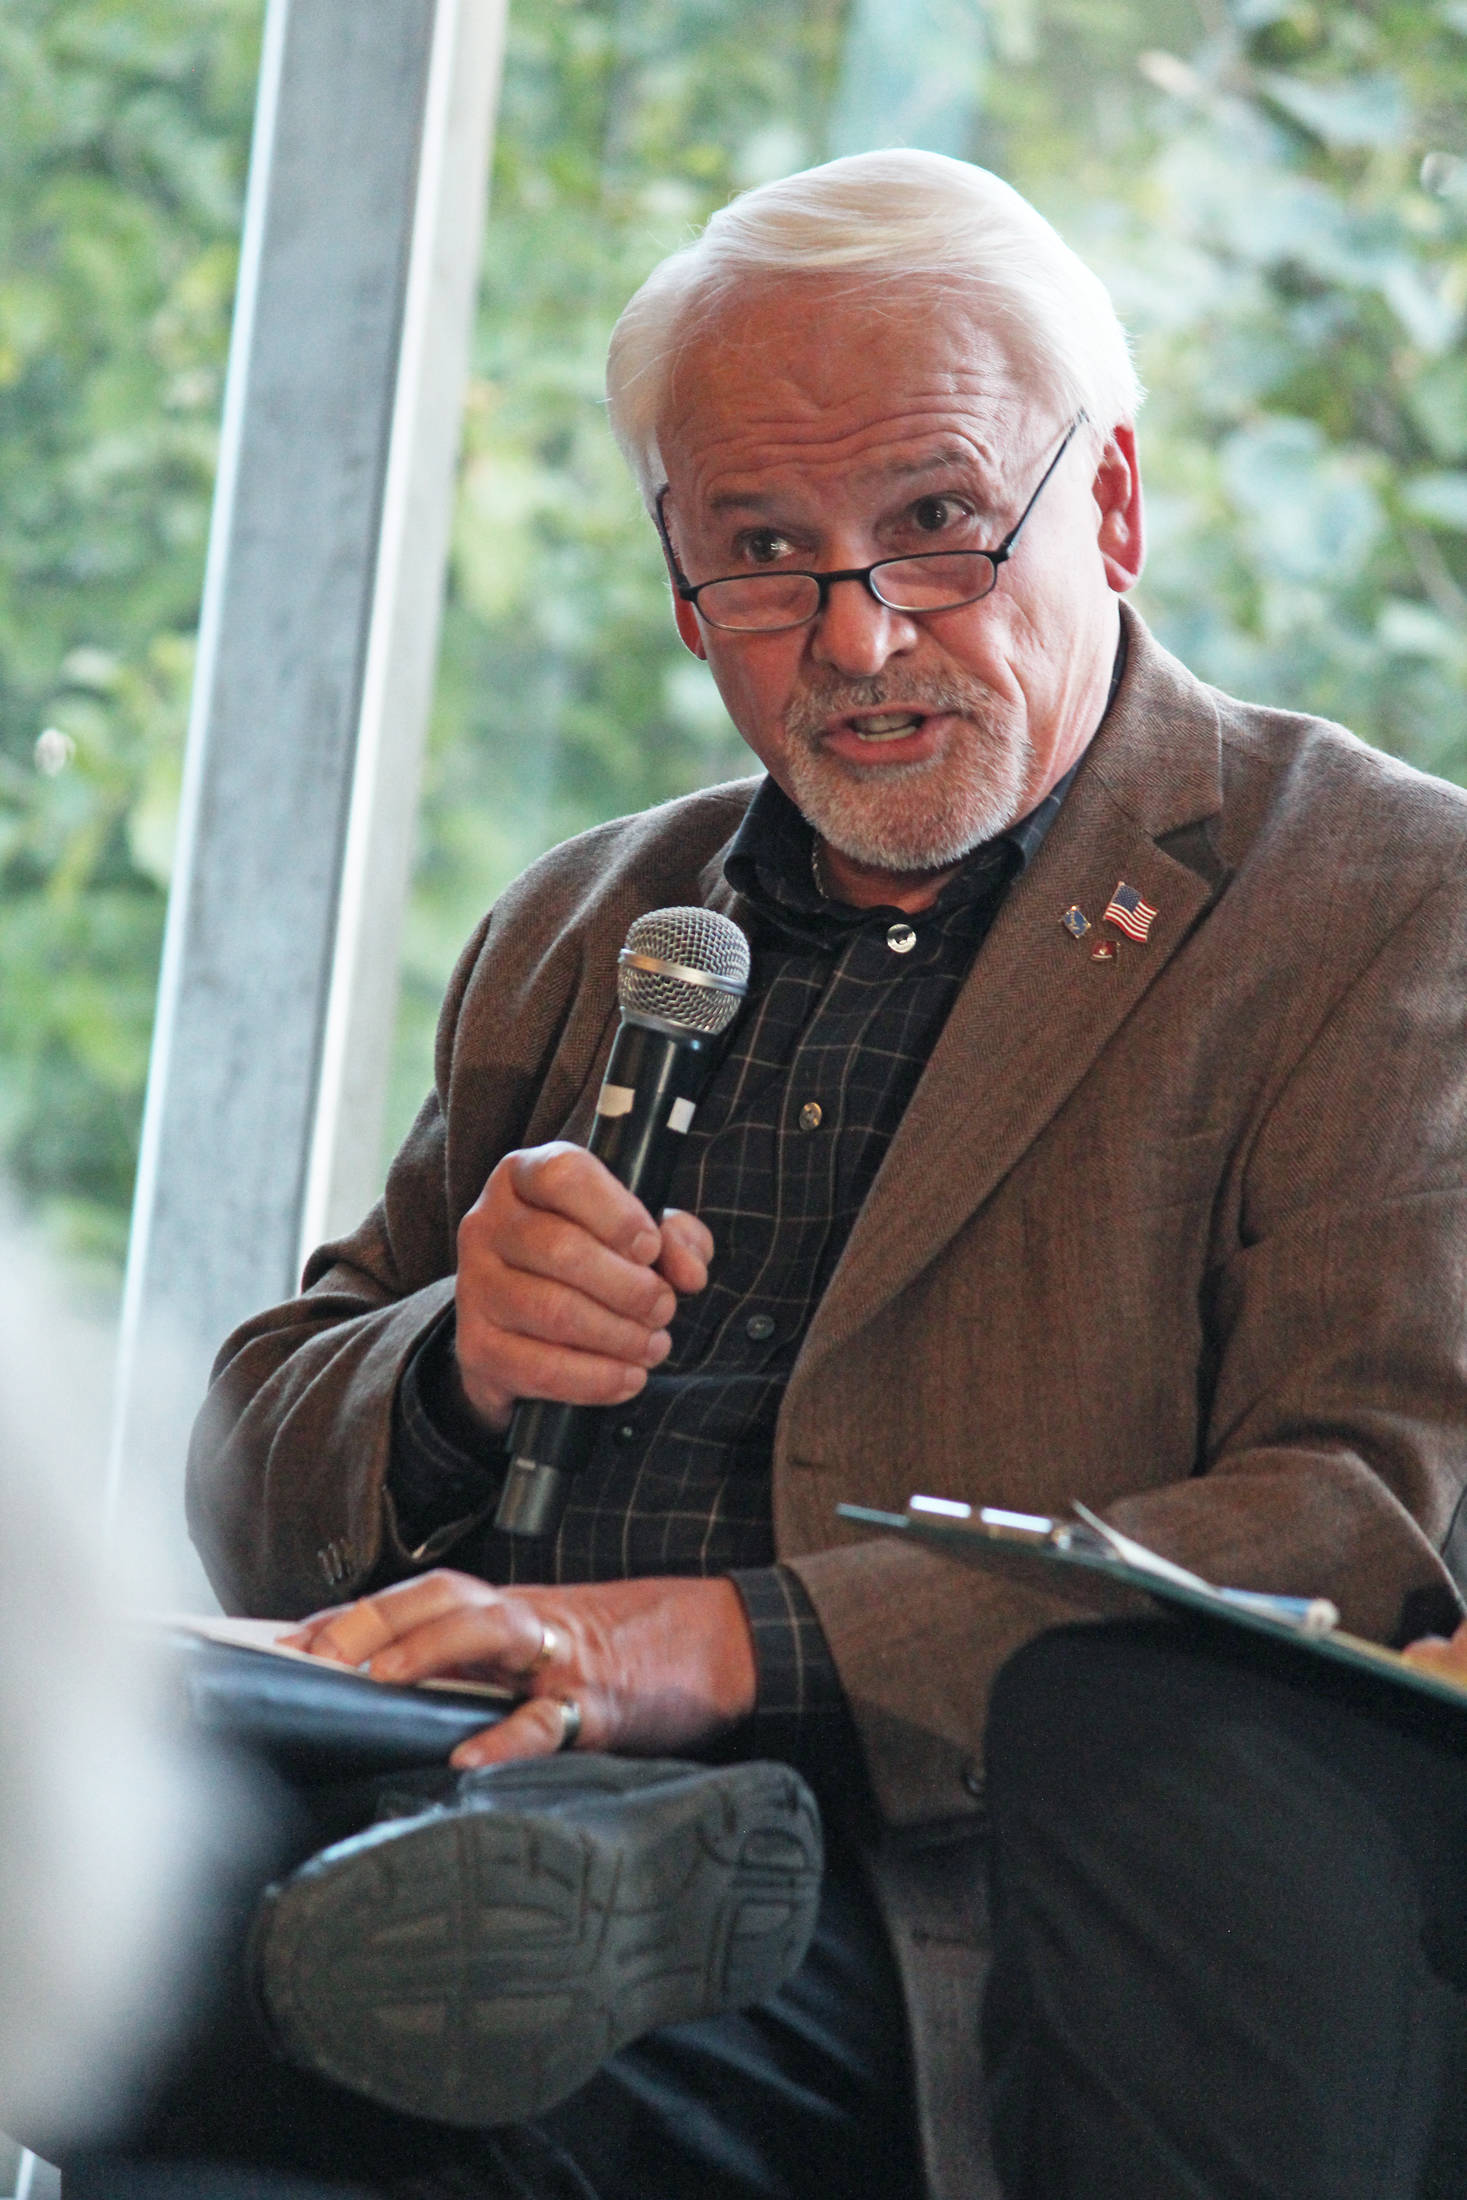 Tom Stroozas, a Homer City Council member who is running for re-election, speaks during a candidate forum Wednesday, Sept. 25, 2019 at the Homer Public Library in Homer, Alaska. (Photo by Megan Pacer/Homer News)